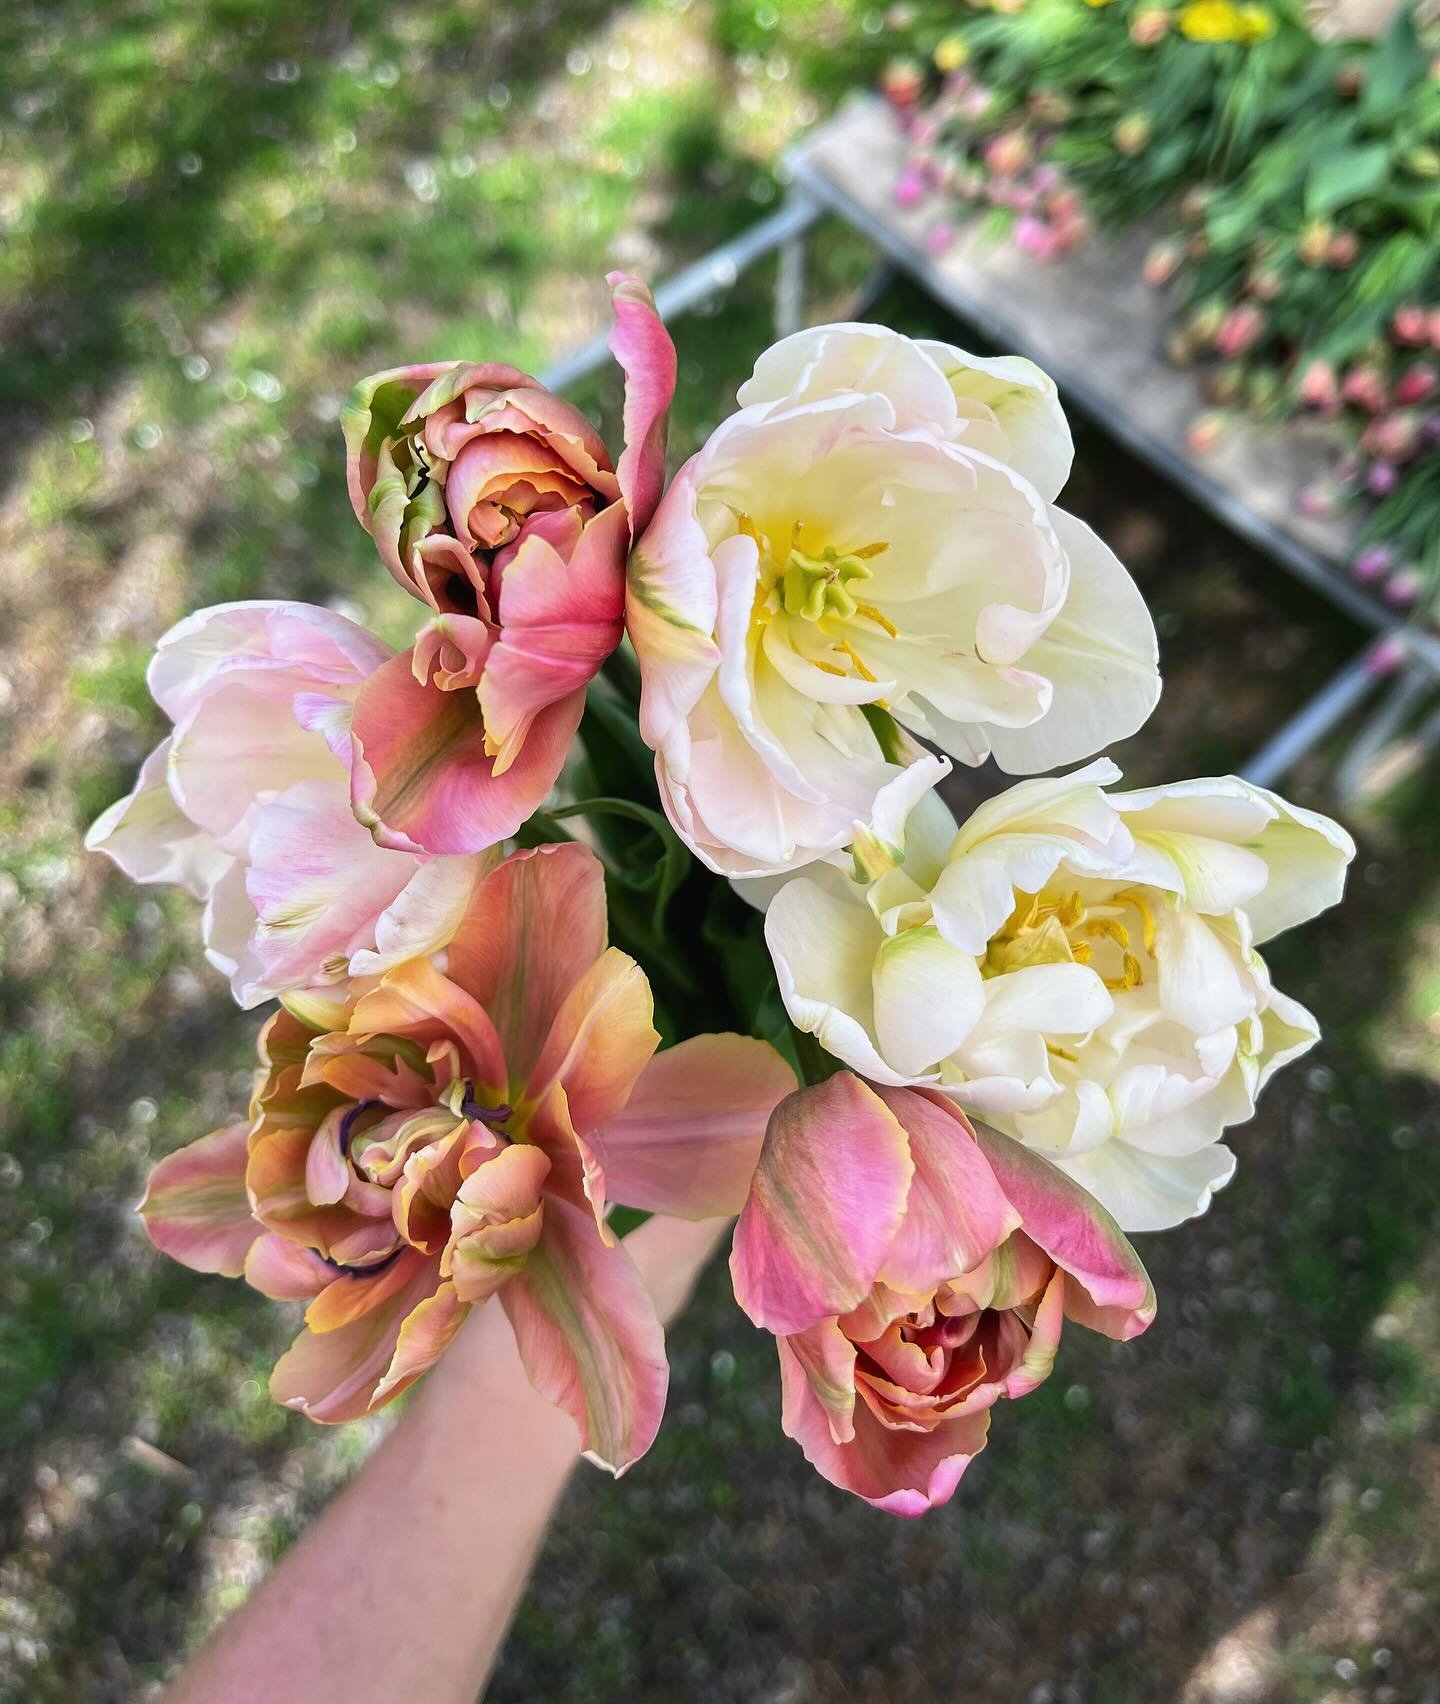 Pulling the last couple varieties from the tulip beds and the colors are DREAMY 😍🌷

Double tulips have multiple layers of petals, look like peonies as they open &amp; have a significantly longer vase life compared to singles. Each day as they age, 